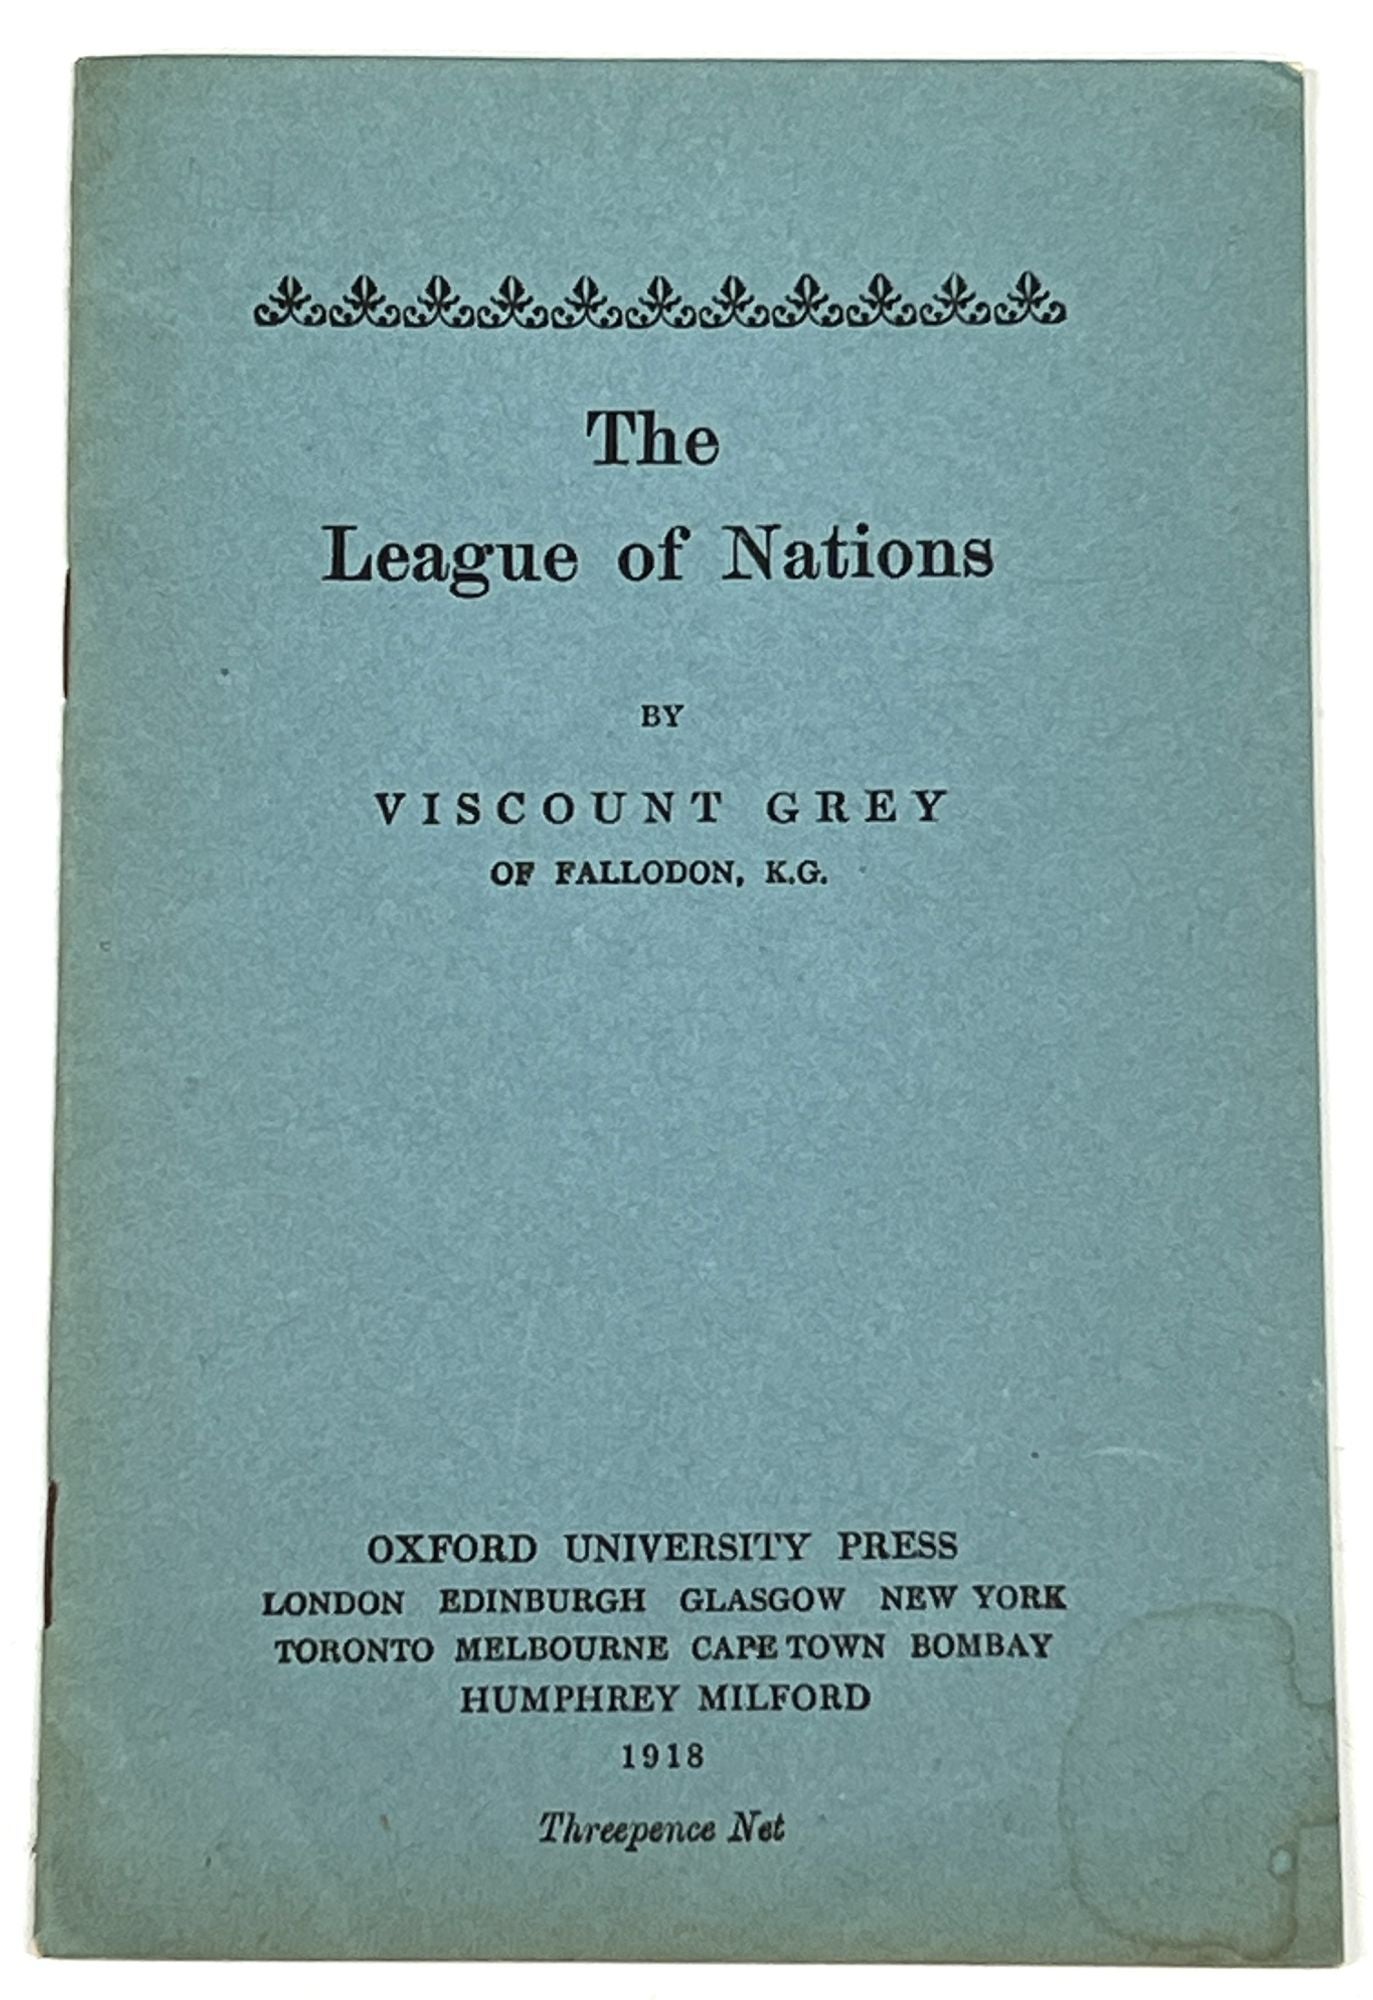 Grey, Viscount - The LEAGUE Of NATIONS